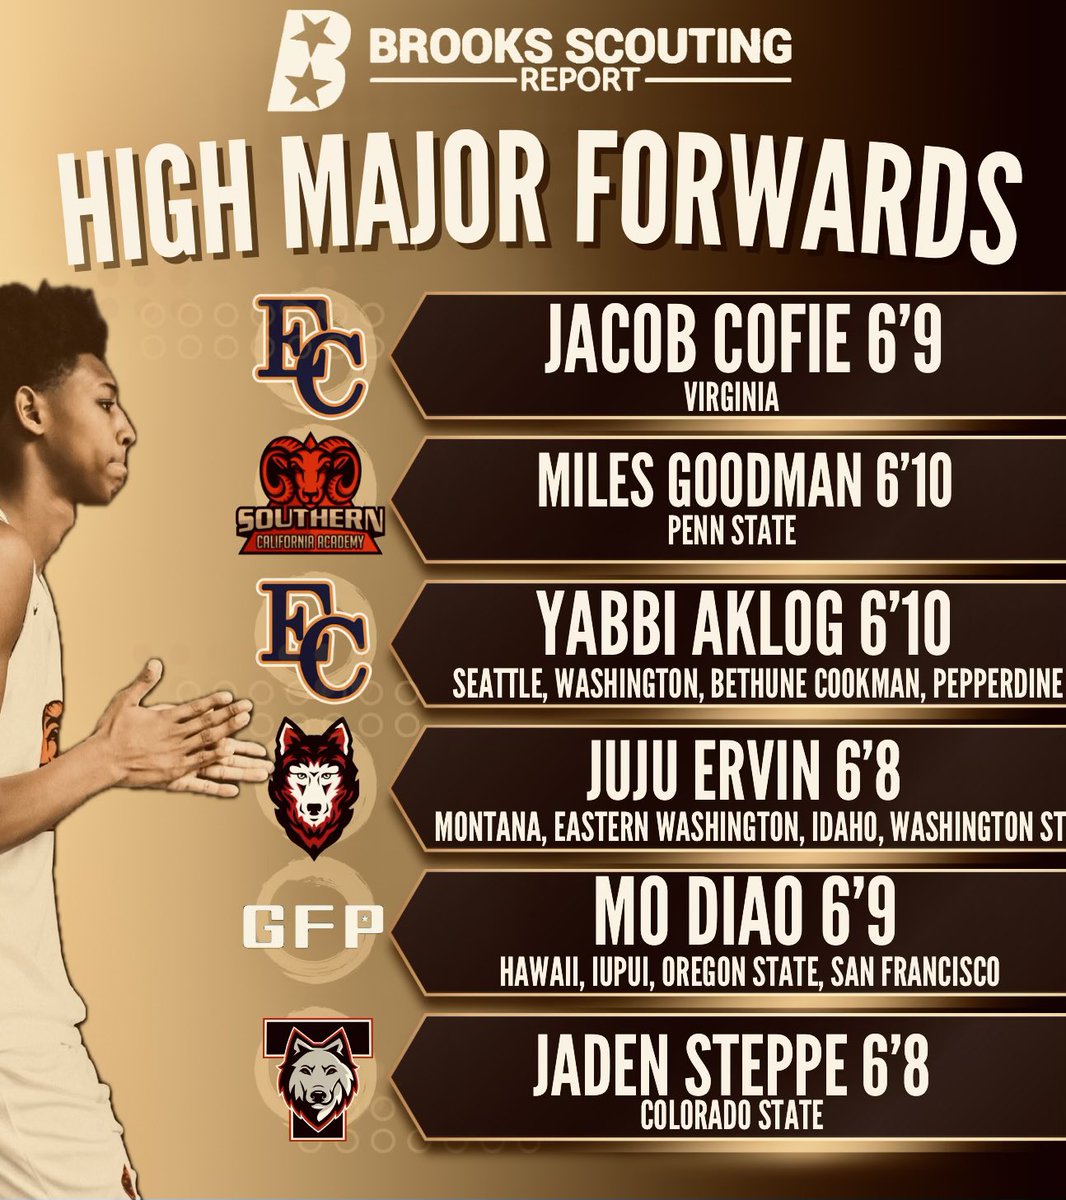 🏁As The Recruiting Calendar Heats Ups So Does The Attention Of Prospects. ⭐️These Local Stars Have Played There Way Into The National Spotlight. These Elite Forwards Prospects In The PNW Have Seen There Recruiting Stock Rise Over The Fall & Winter Months.